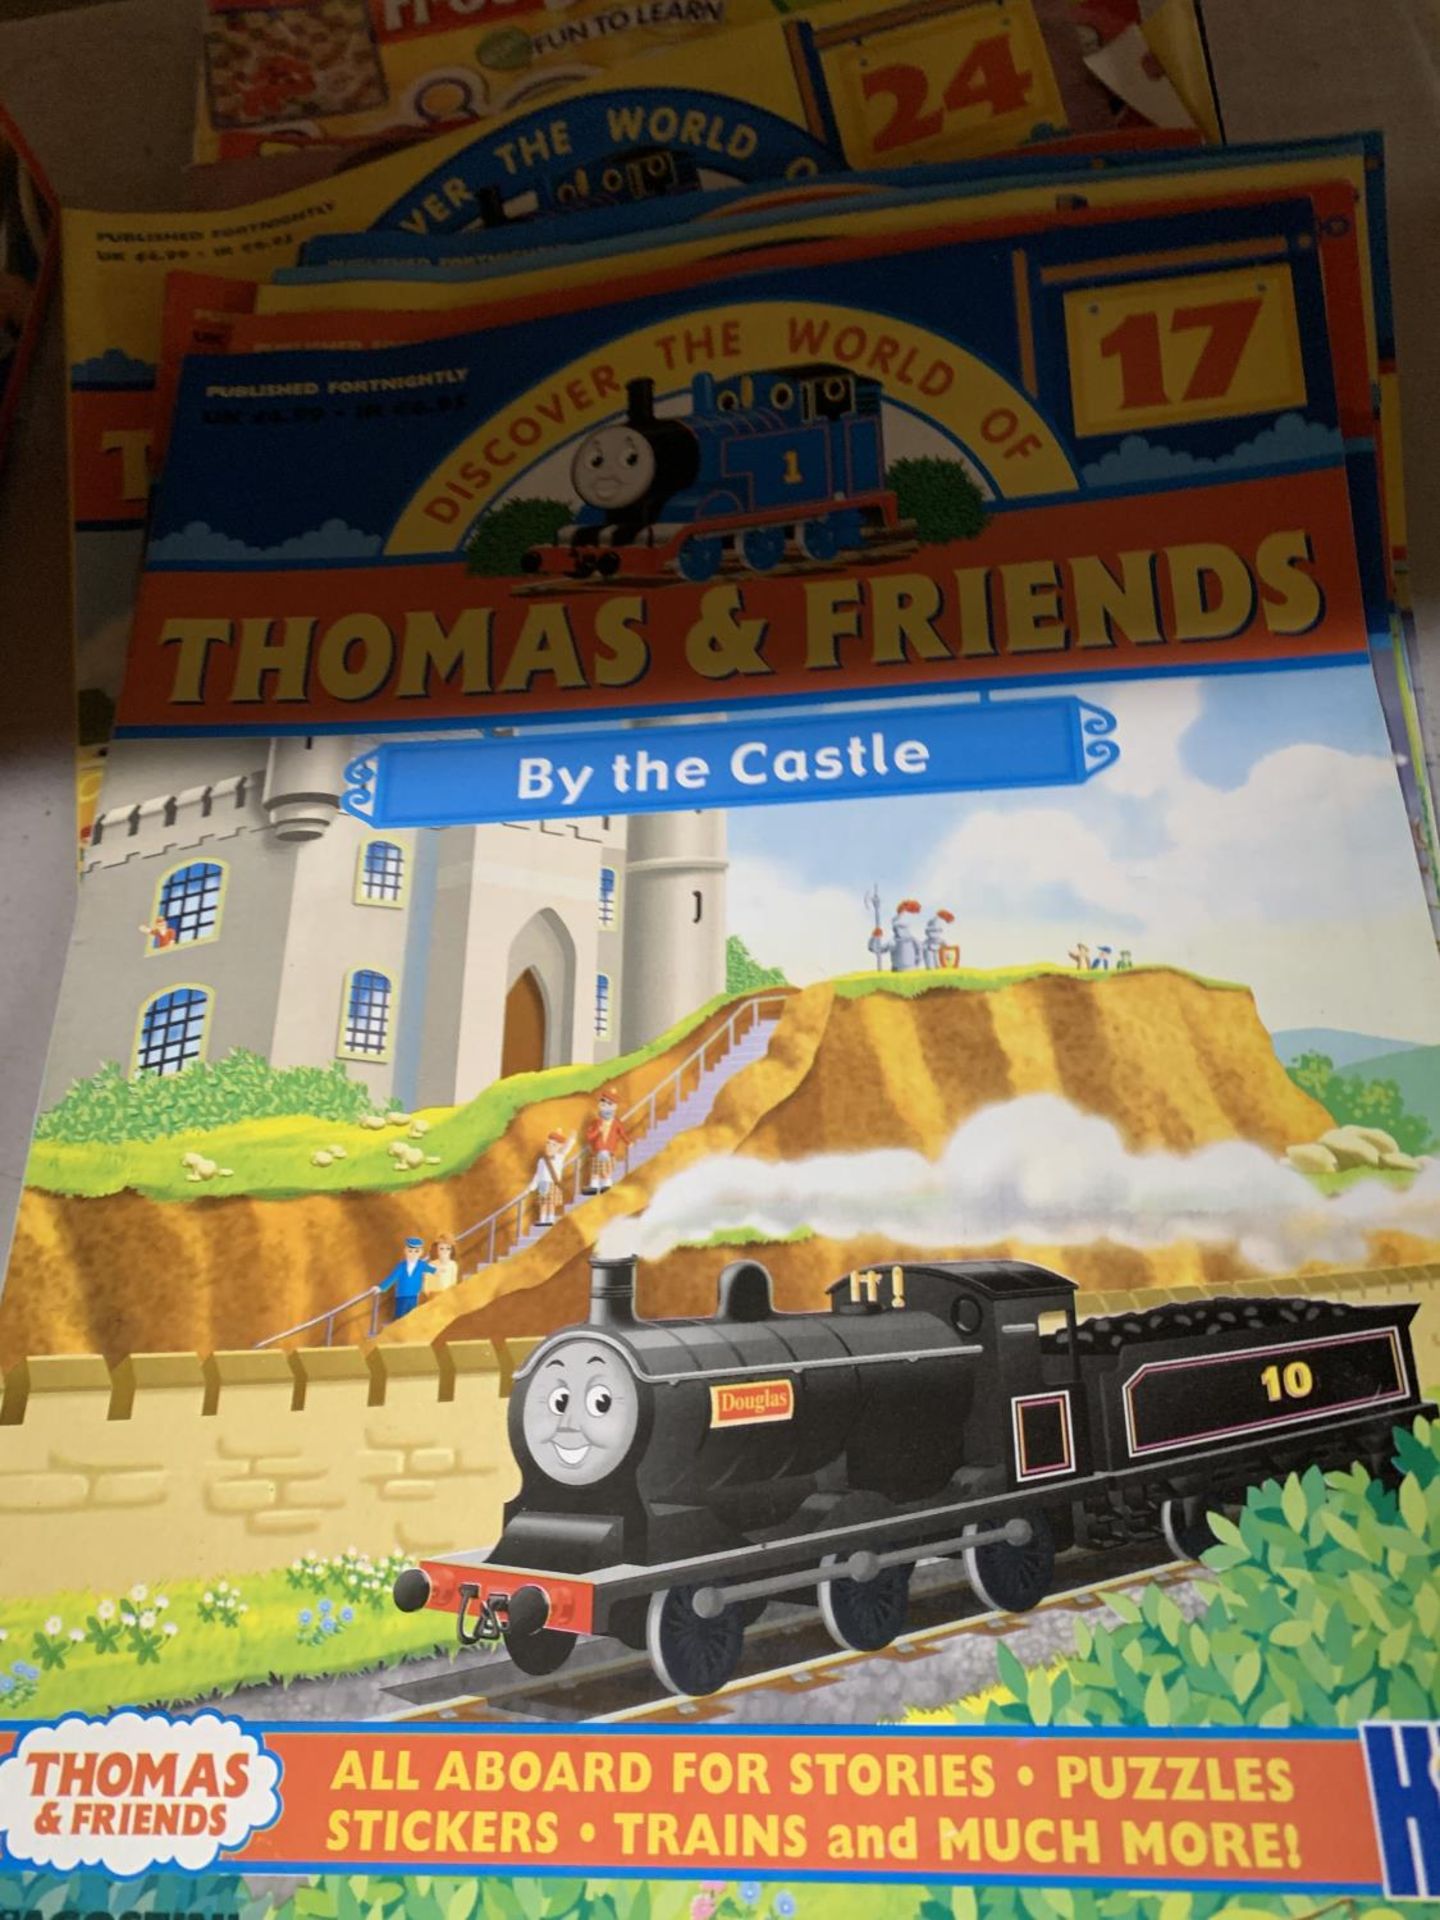 A COLLECTION OF THOMAS AND FRIENDS COMICS PUBLISHED BY DEAGOSTINI - Image 2 of 3